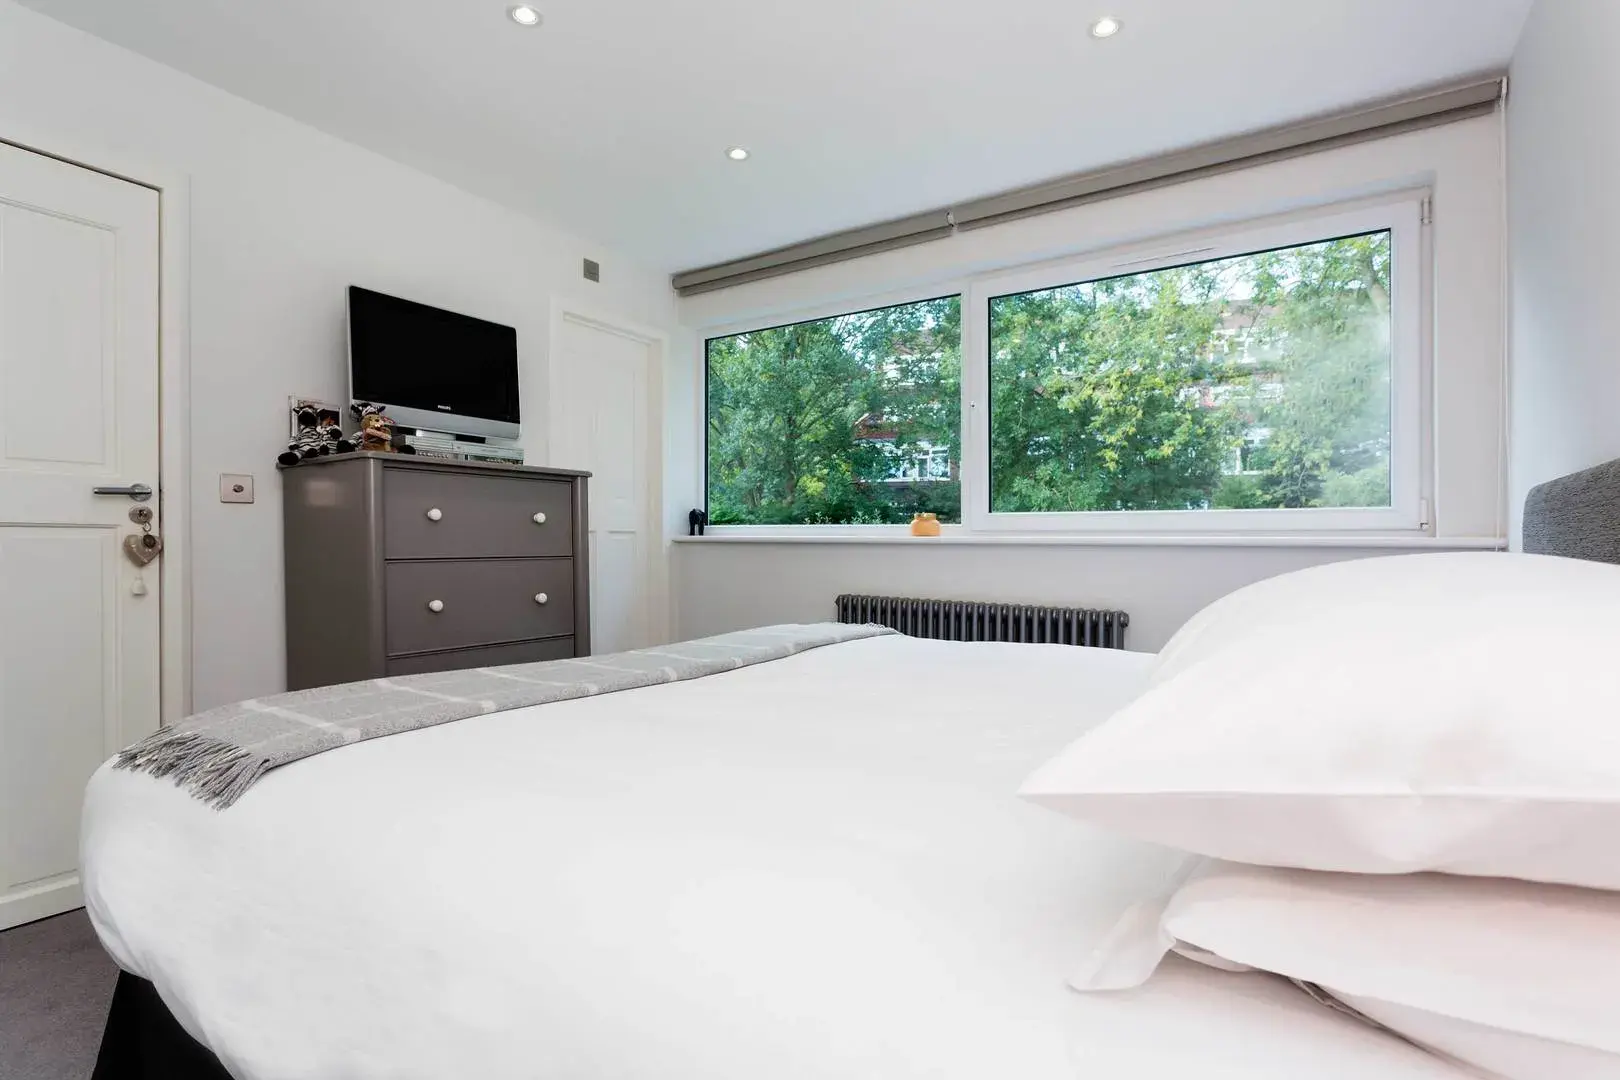 Sarjant Path, holiday home in Wimbledon – South London, London